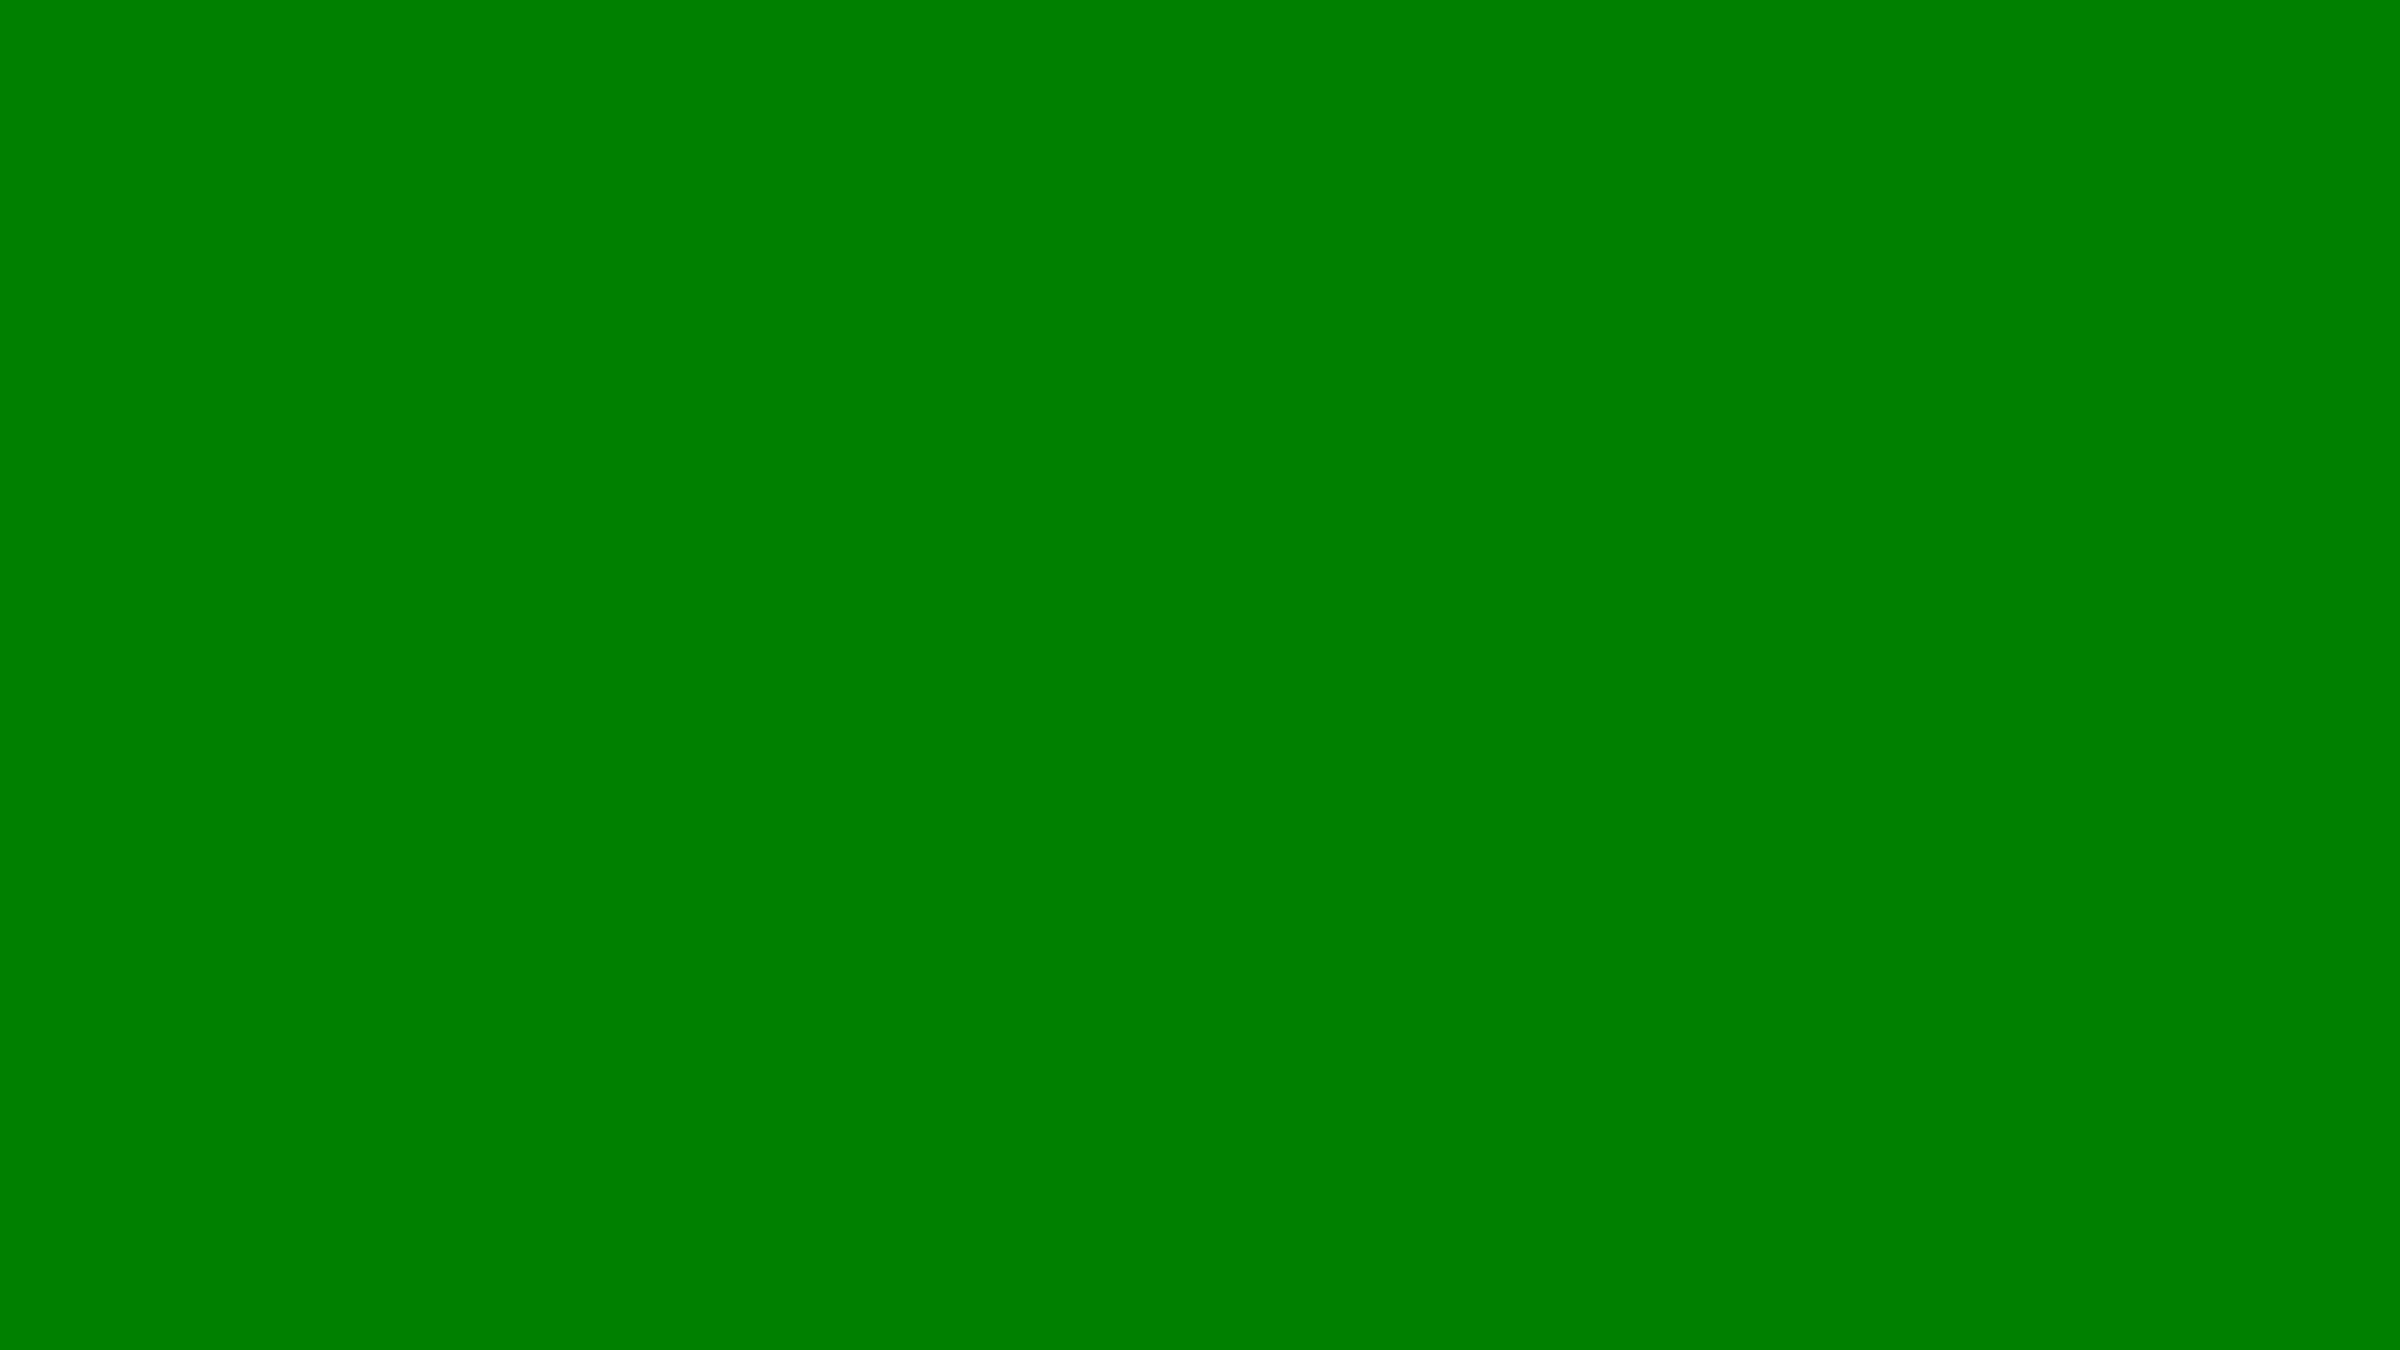 HD Wide Green Screen Video Background By Libertybudget